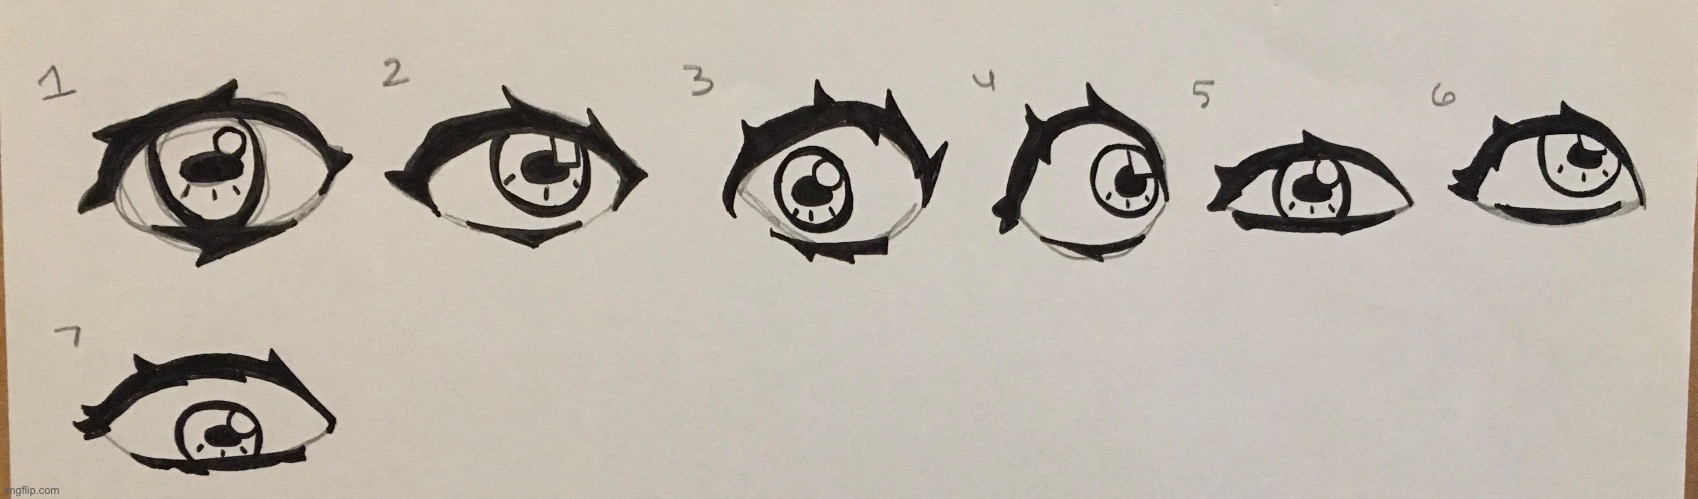 I drew a bunch of eyeballs! Which one’s your favorite? | image tagged in anime,eyeball,drawing,favorite | made w/ Imgflip meme maker